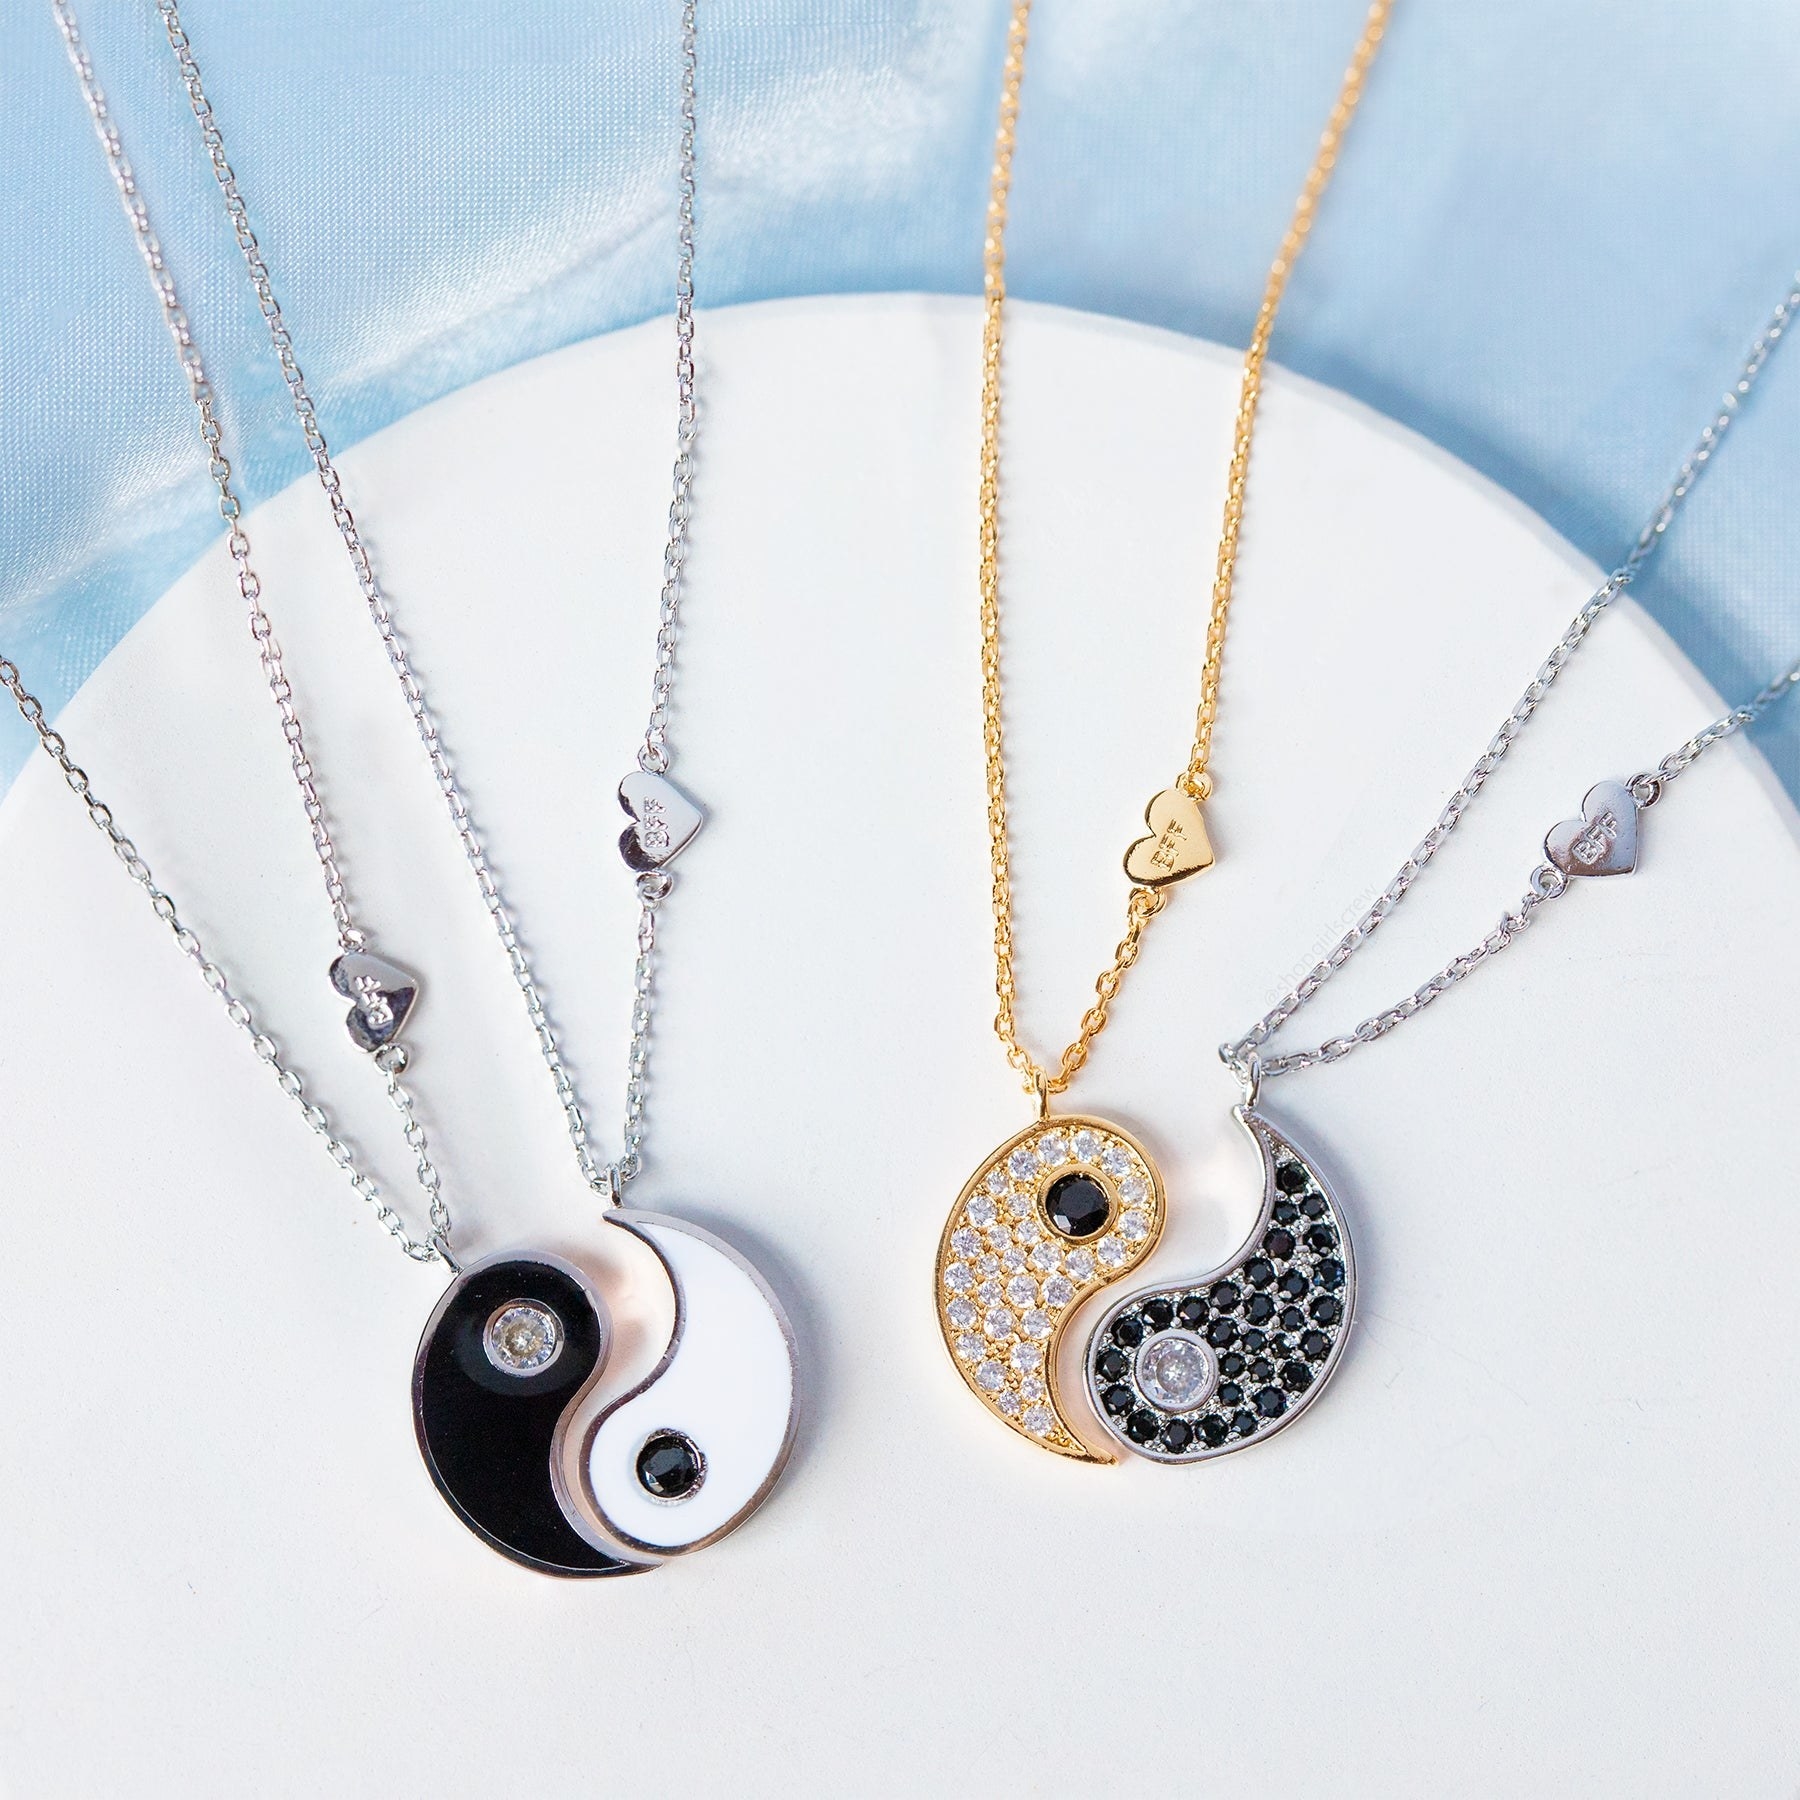 Two sets of yin and yang necklaces